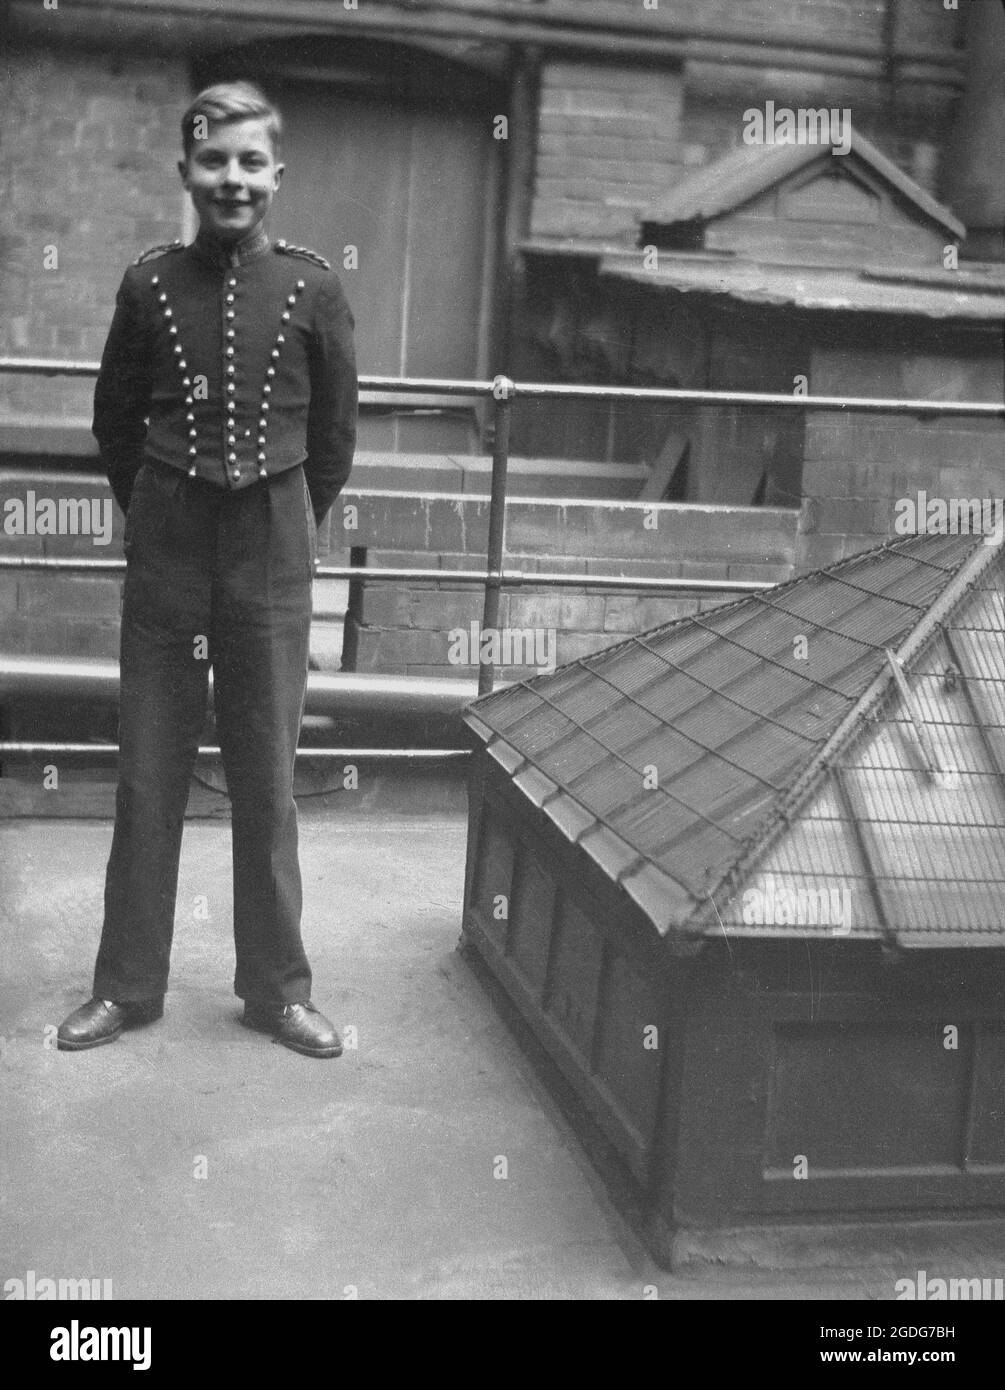 1940s, historical, a hotel bellboy in his uniform standing on a flat roofed area beside an air vent, London, England, UK. A bellboy was traditionally an adolescent male, hence the tern bellboy, who was on call to run general errands and to be of assistance for guests during their stay, as well carrying luggage to and from their rooms, when they checked in and out. Stock Photo